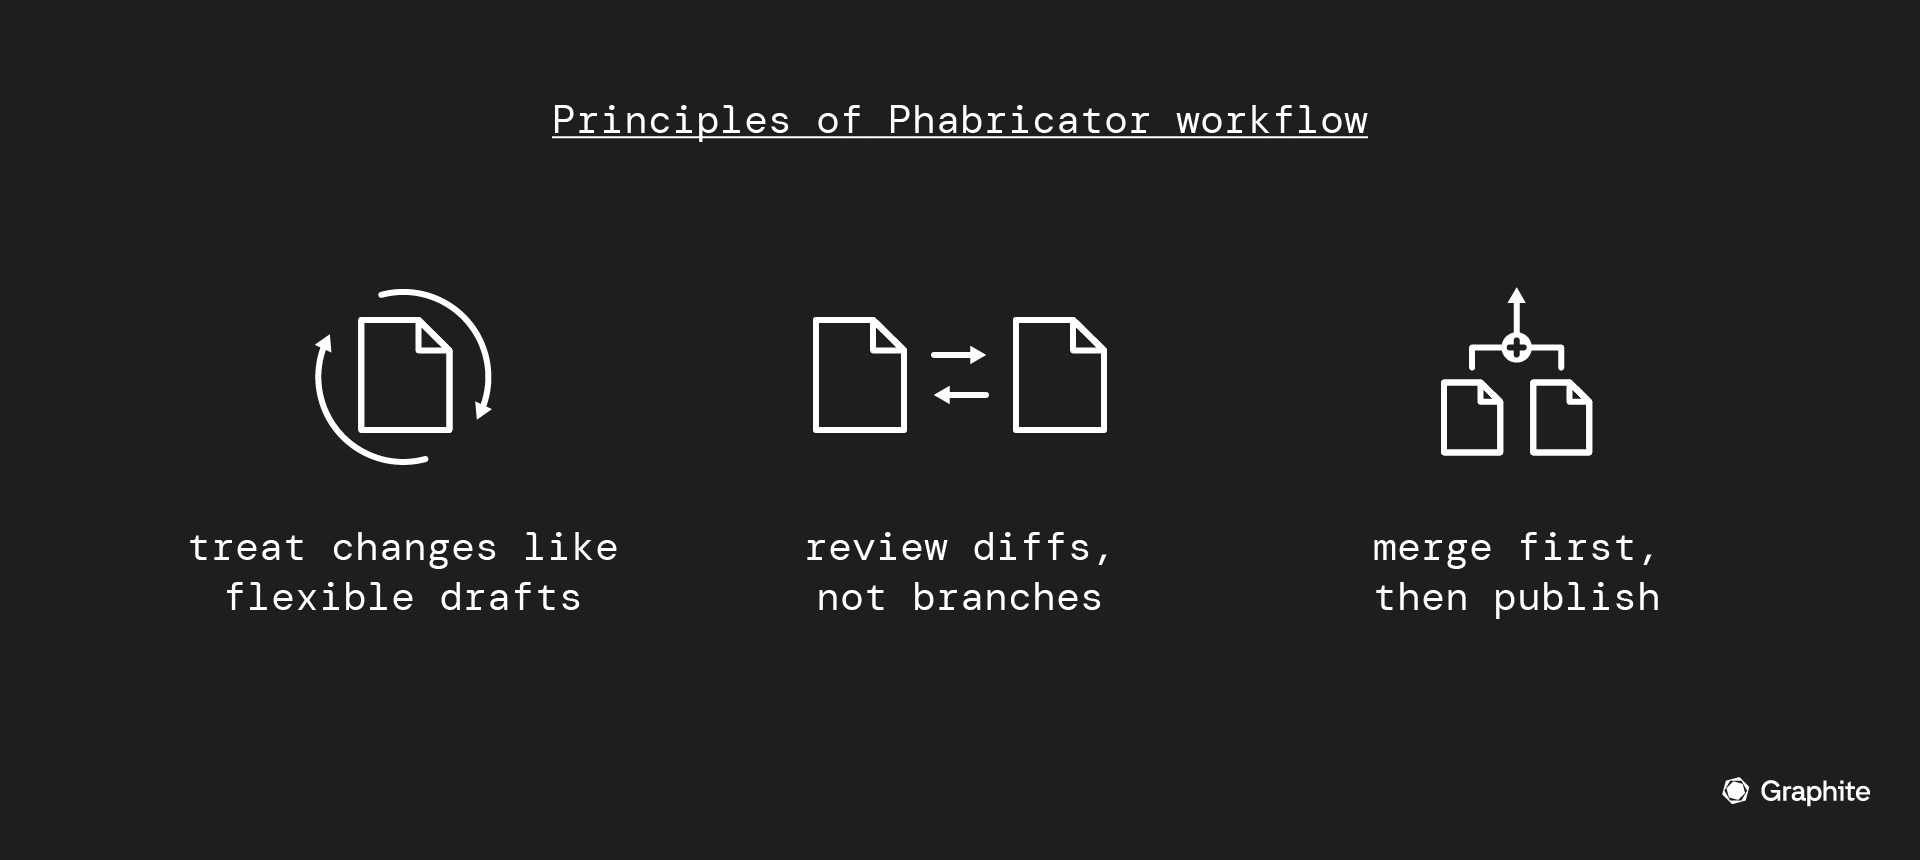 principles of phabricator workflow: treat changes like flexible drafts, review diffs not branches, merge first then publish